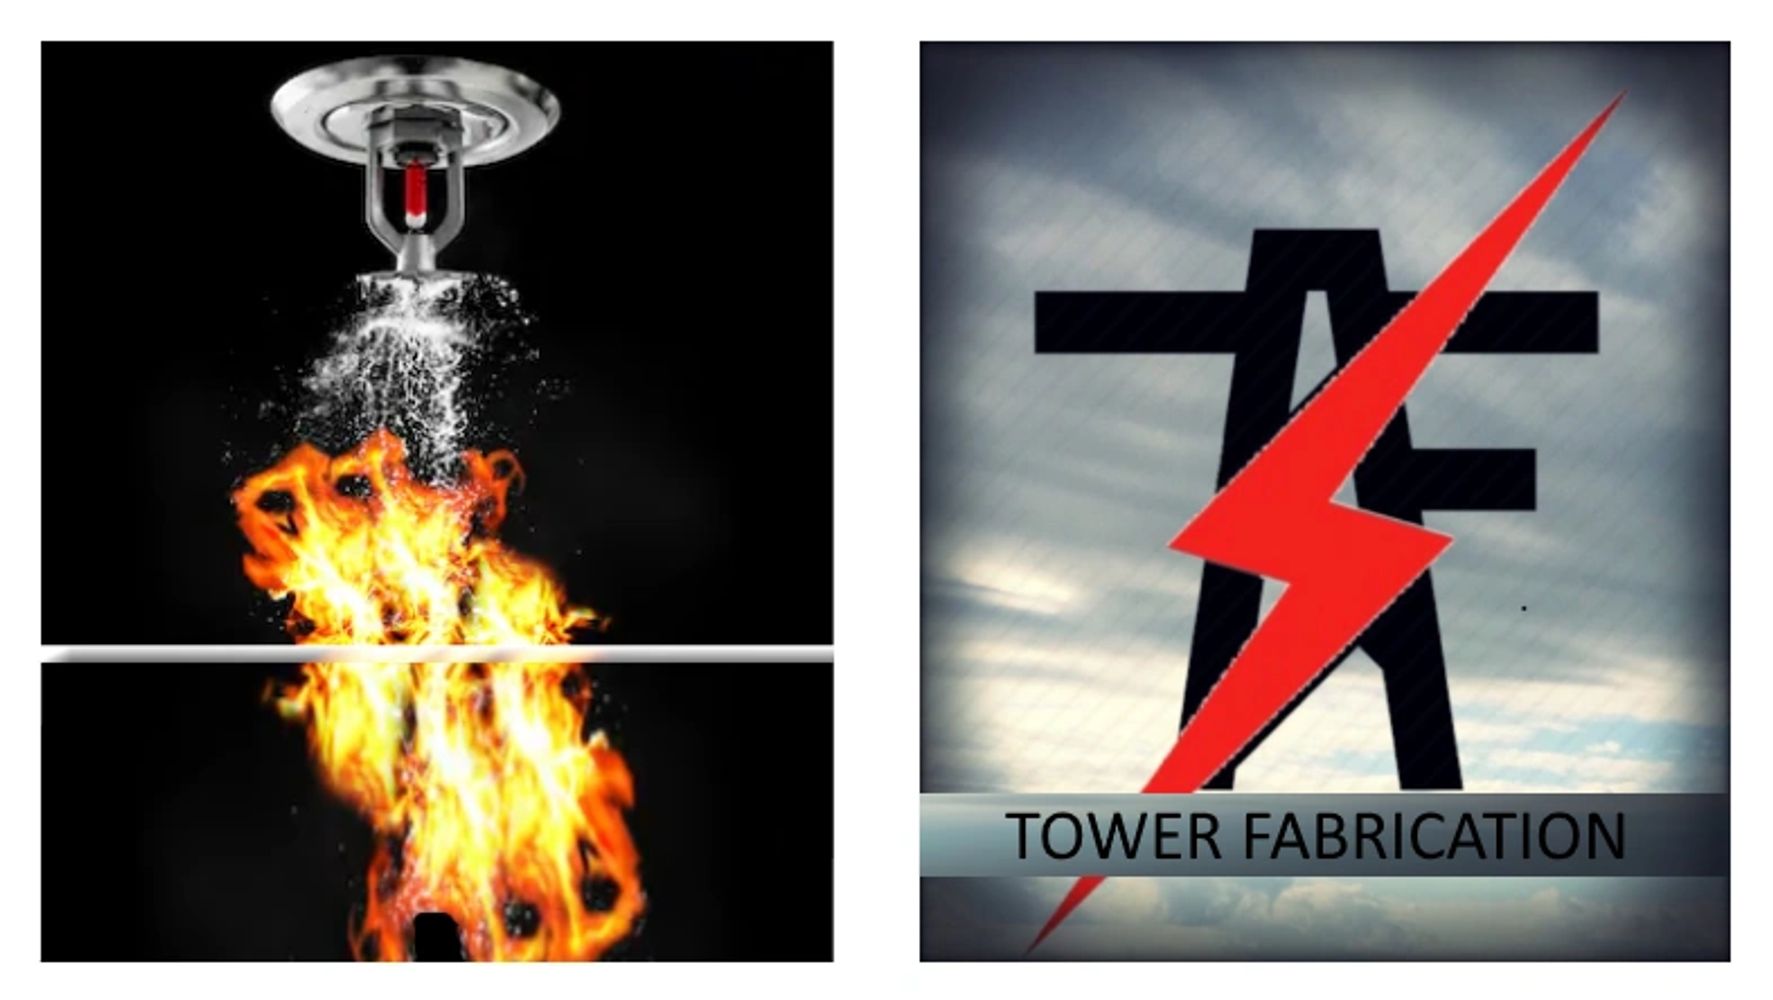 Streamline Industries
Tower Fabrication
Fire Protection
PLC Panels
